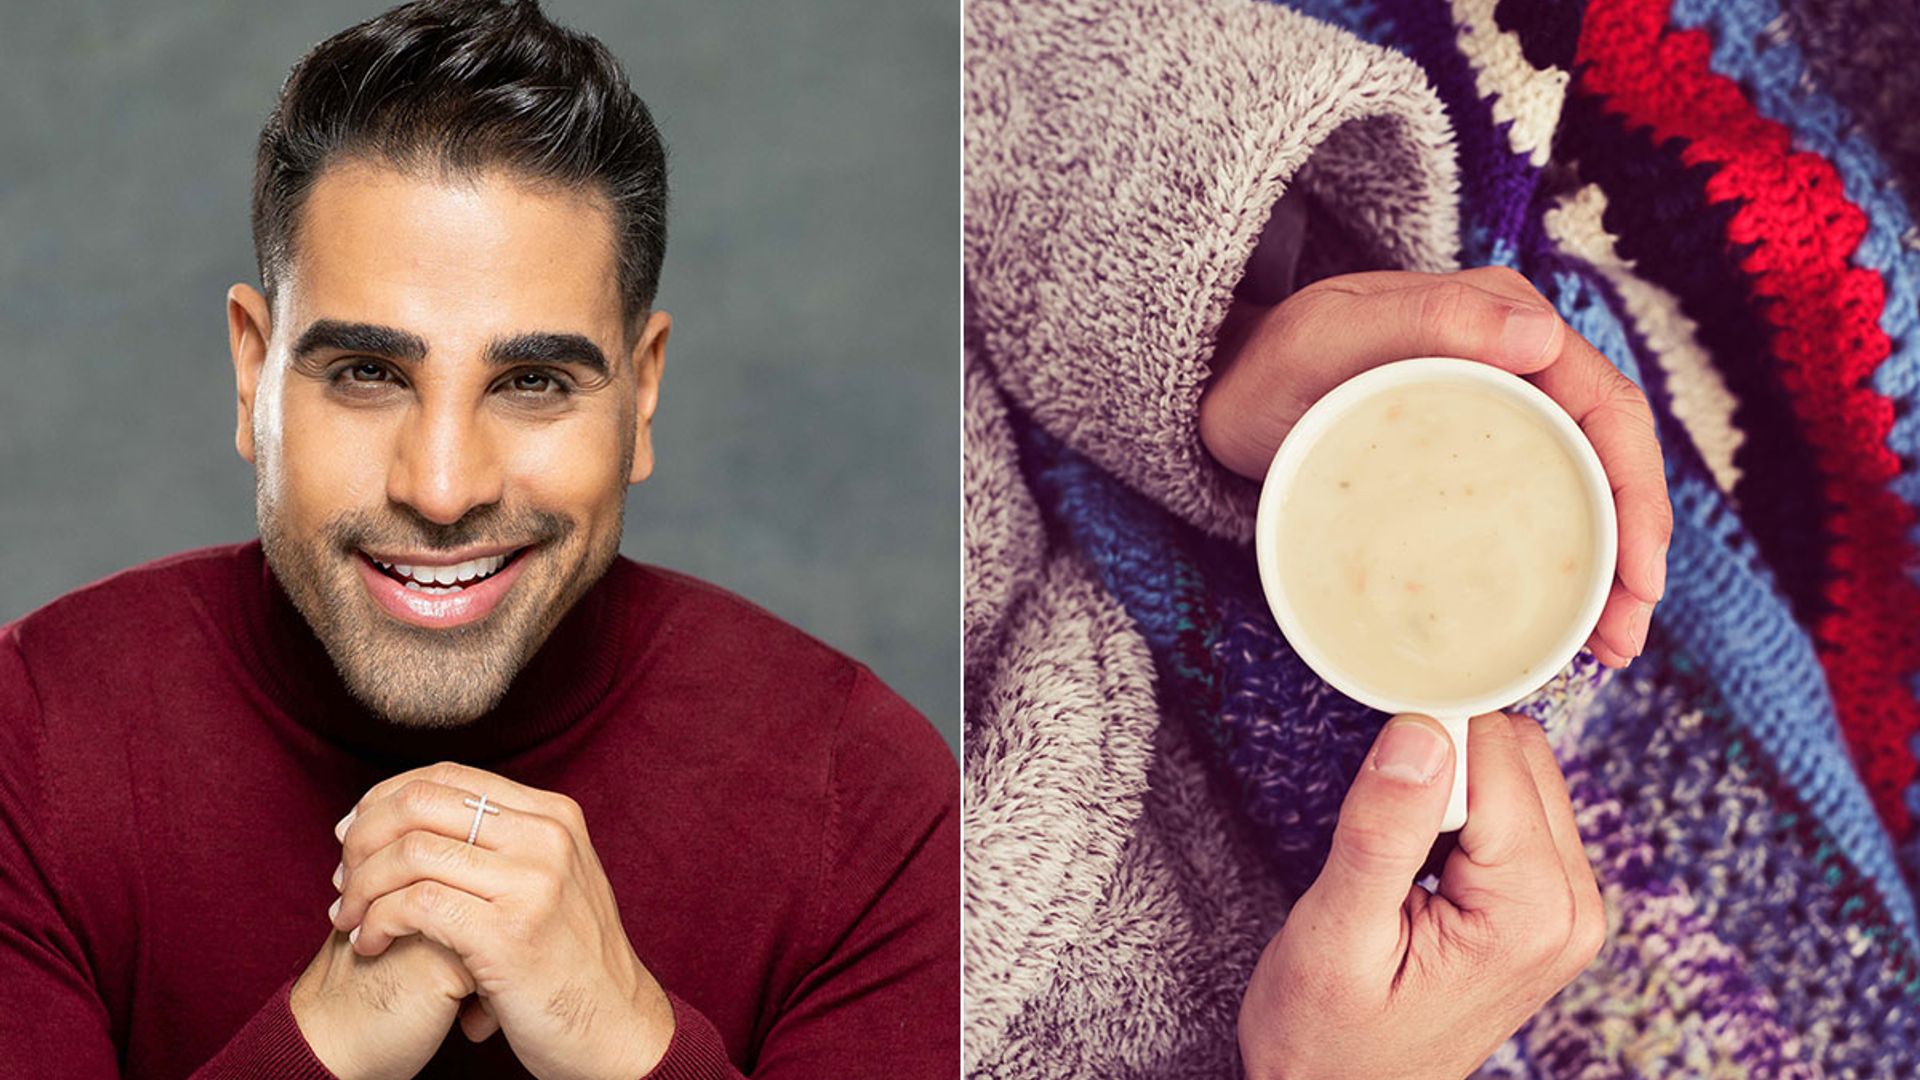 What's the best way to protect yourself against winter allergies? Dr Ranj explains